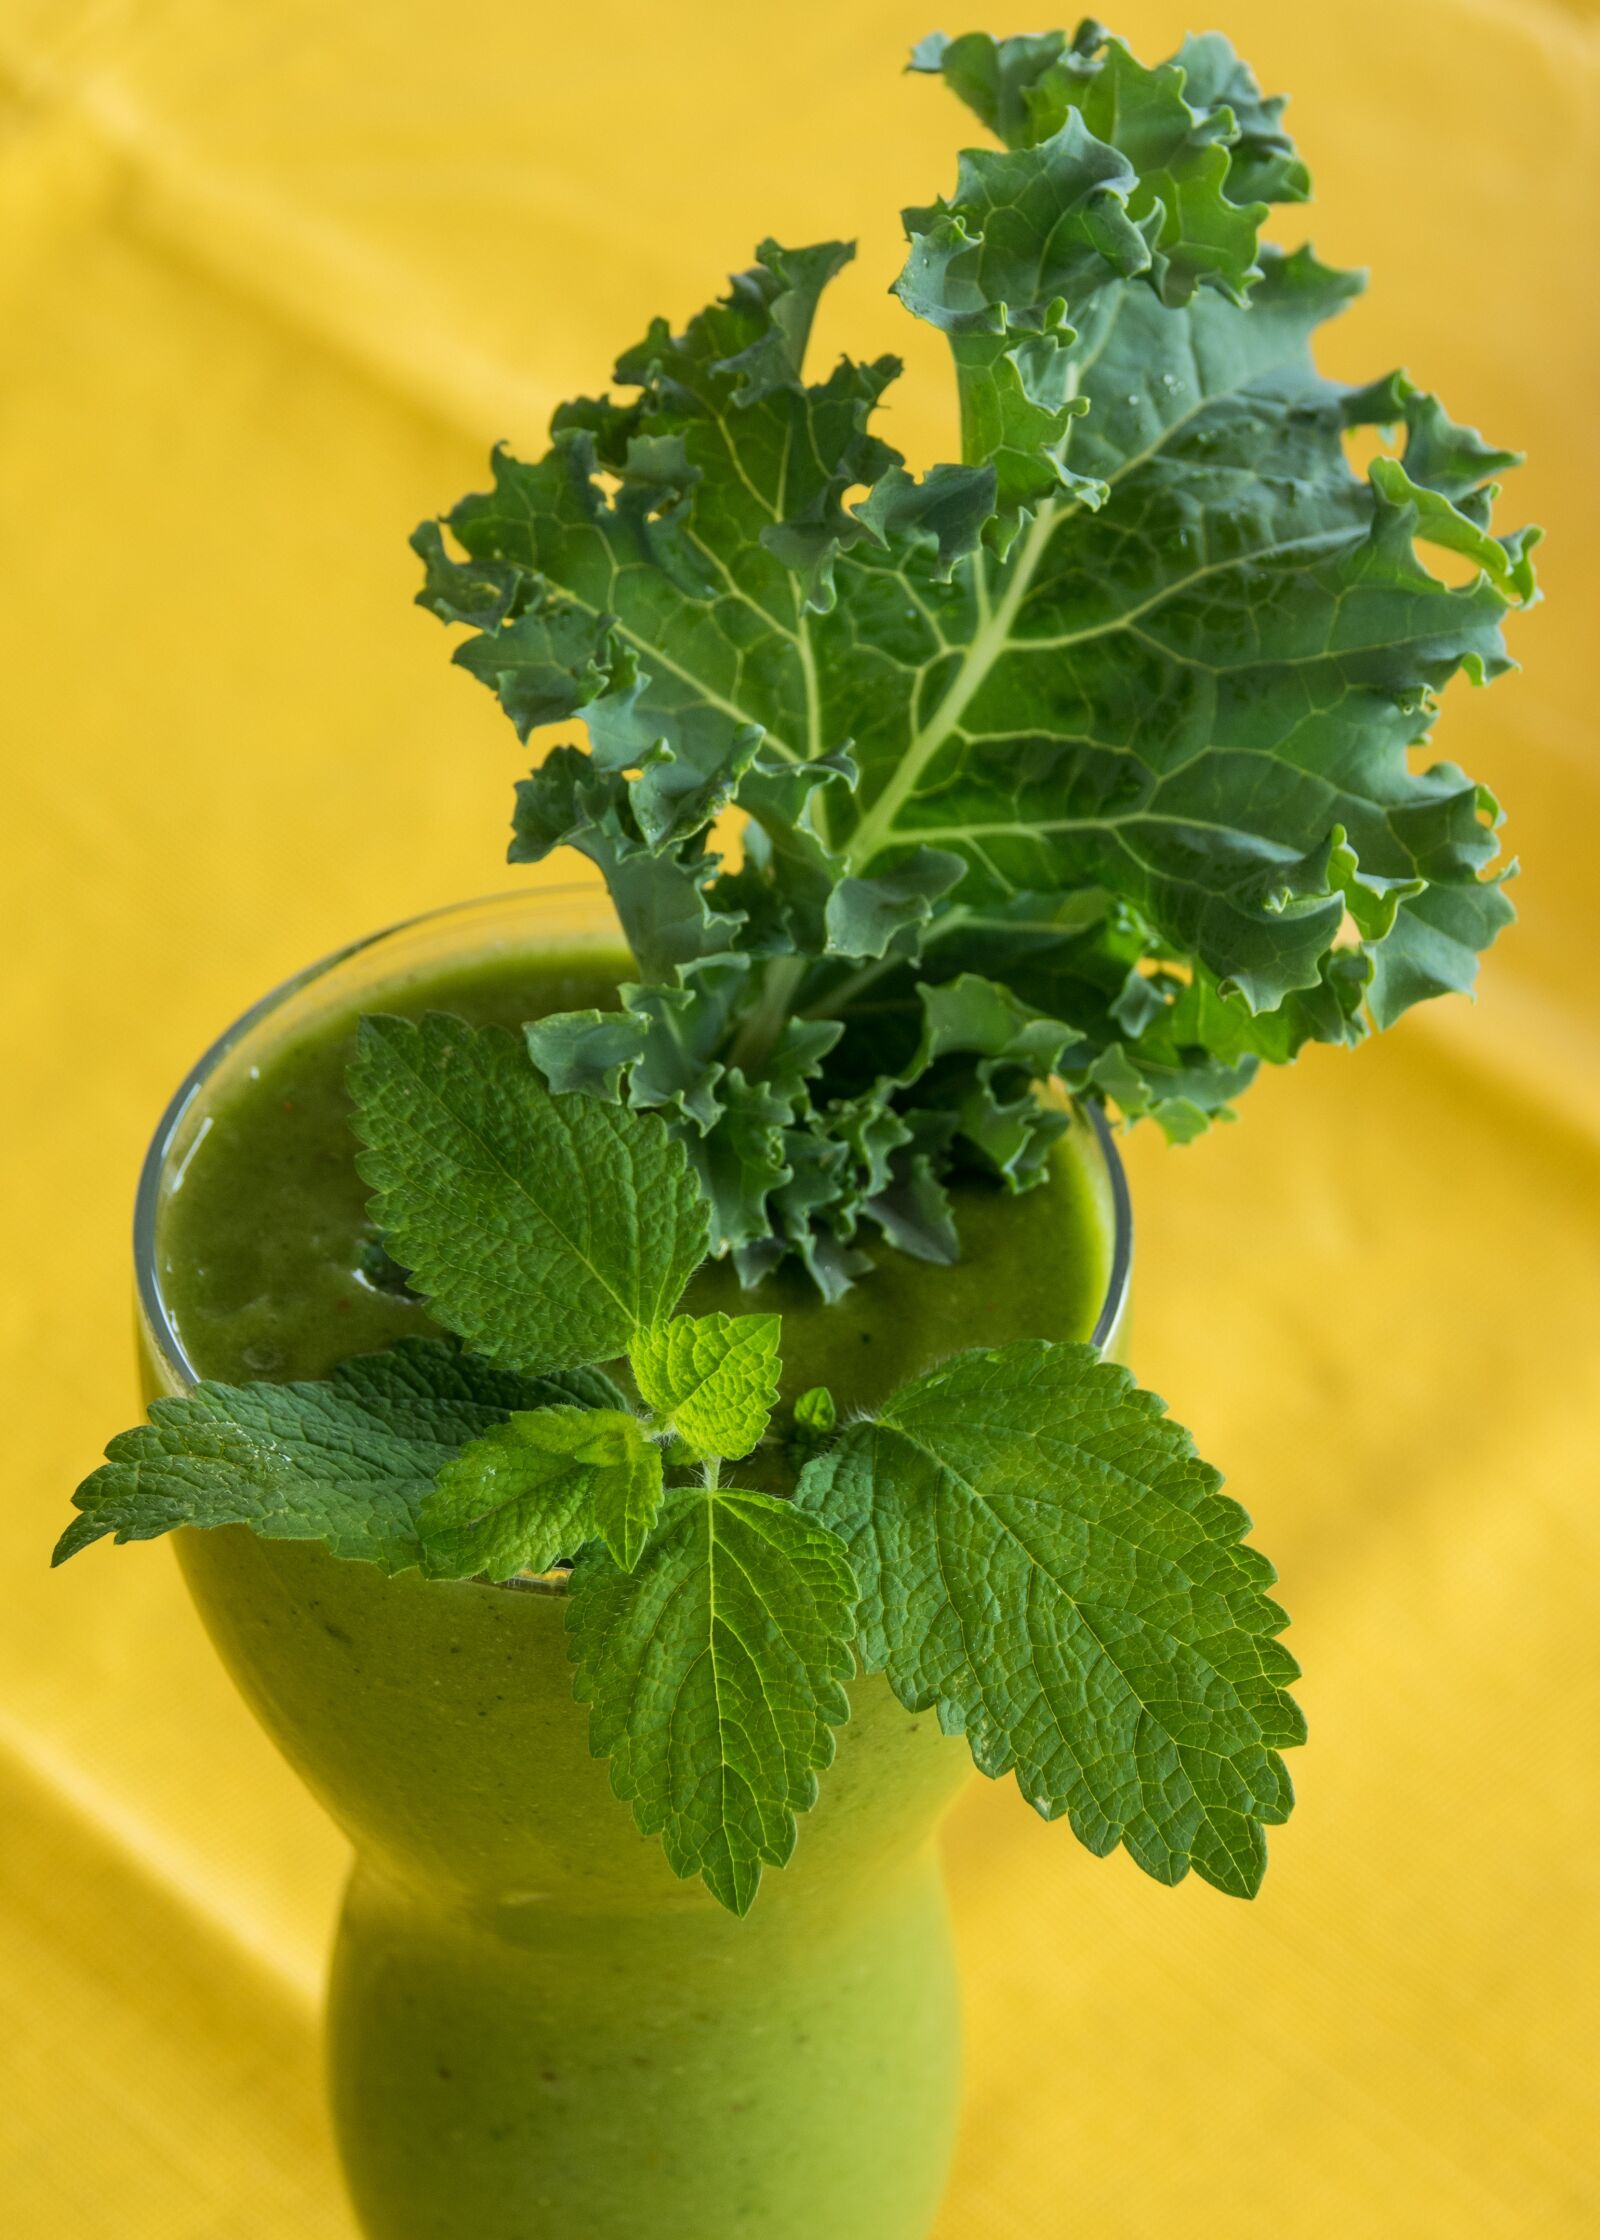 Sony Cyber-shot DSC-RX10 III sample photo. Green smoothie, smoothie, kale photography